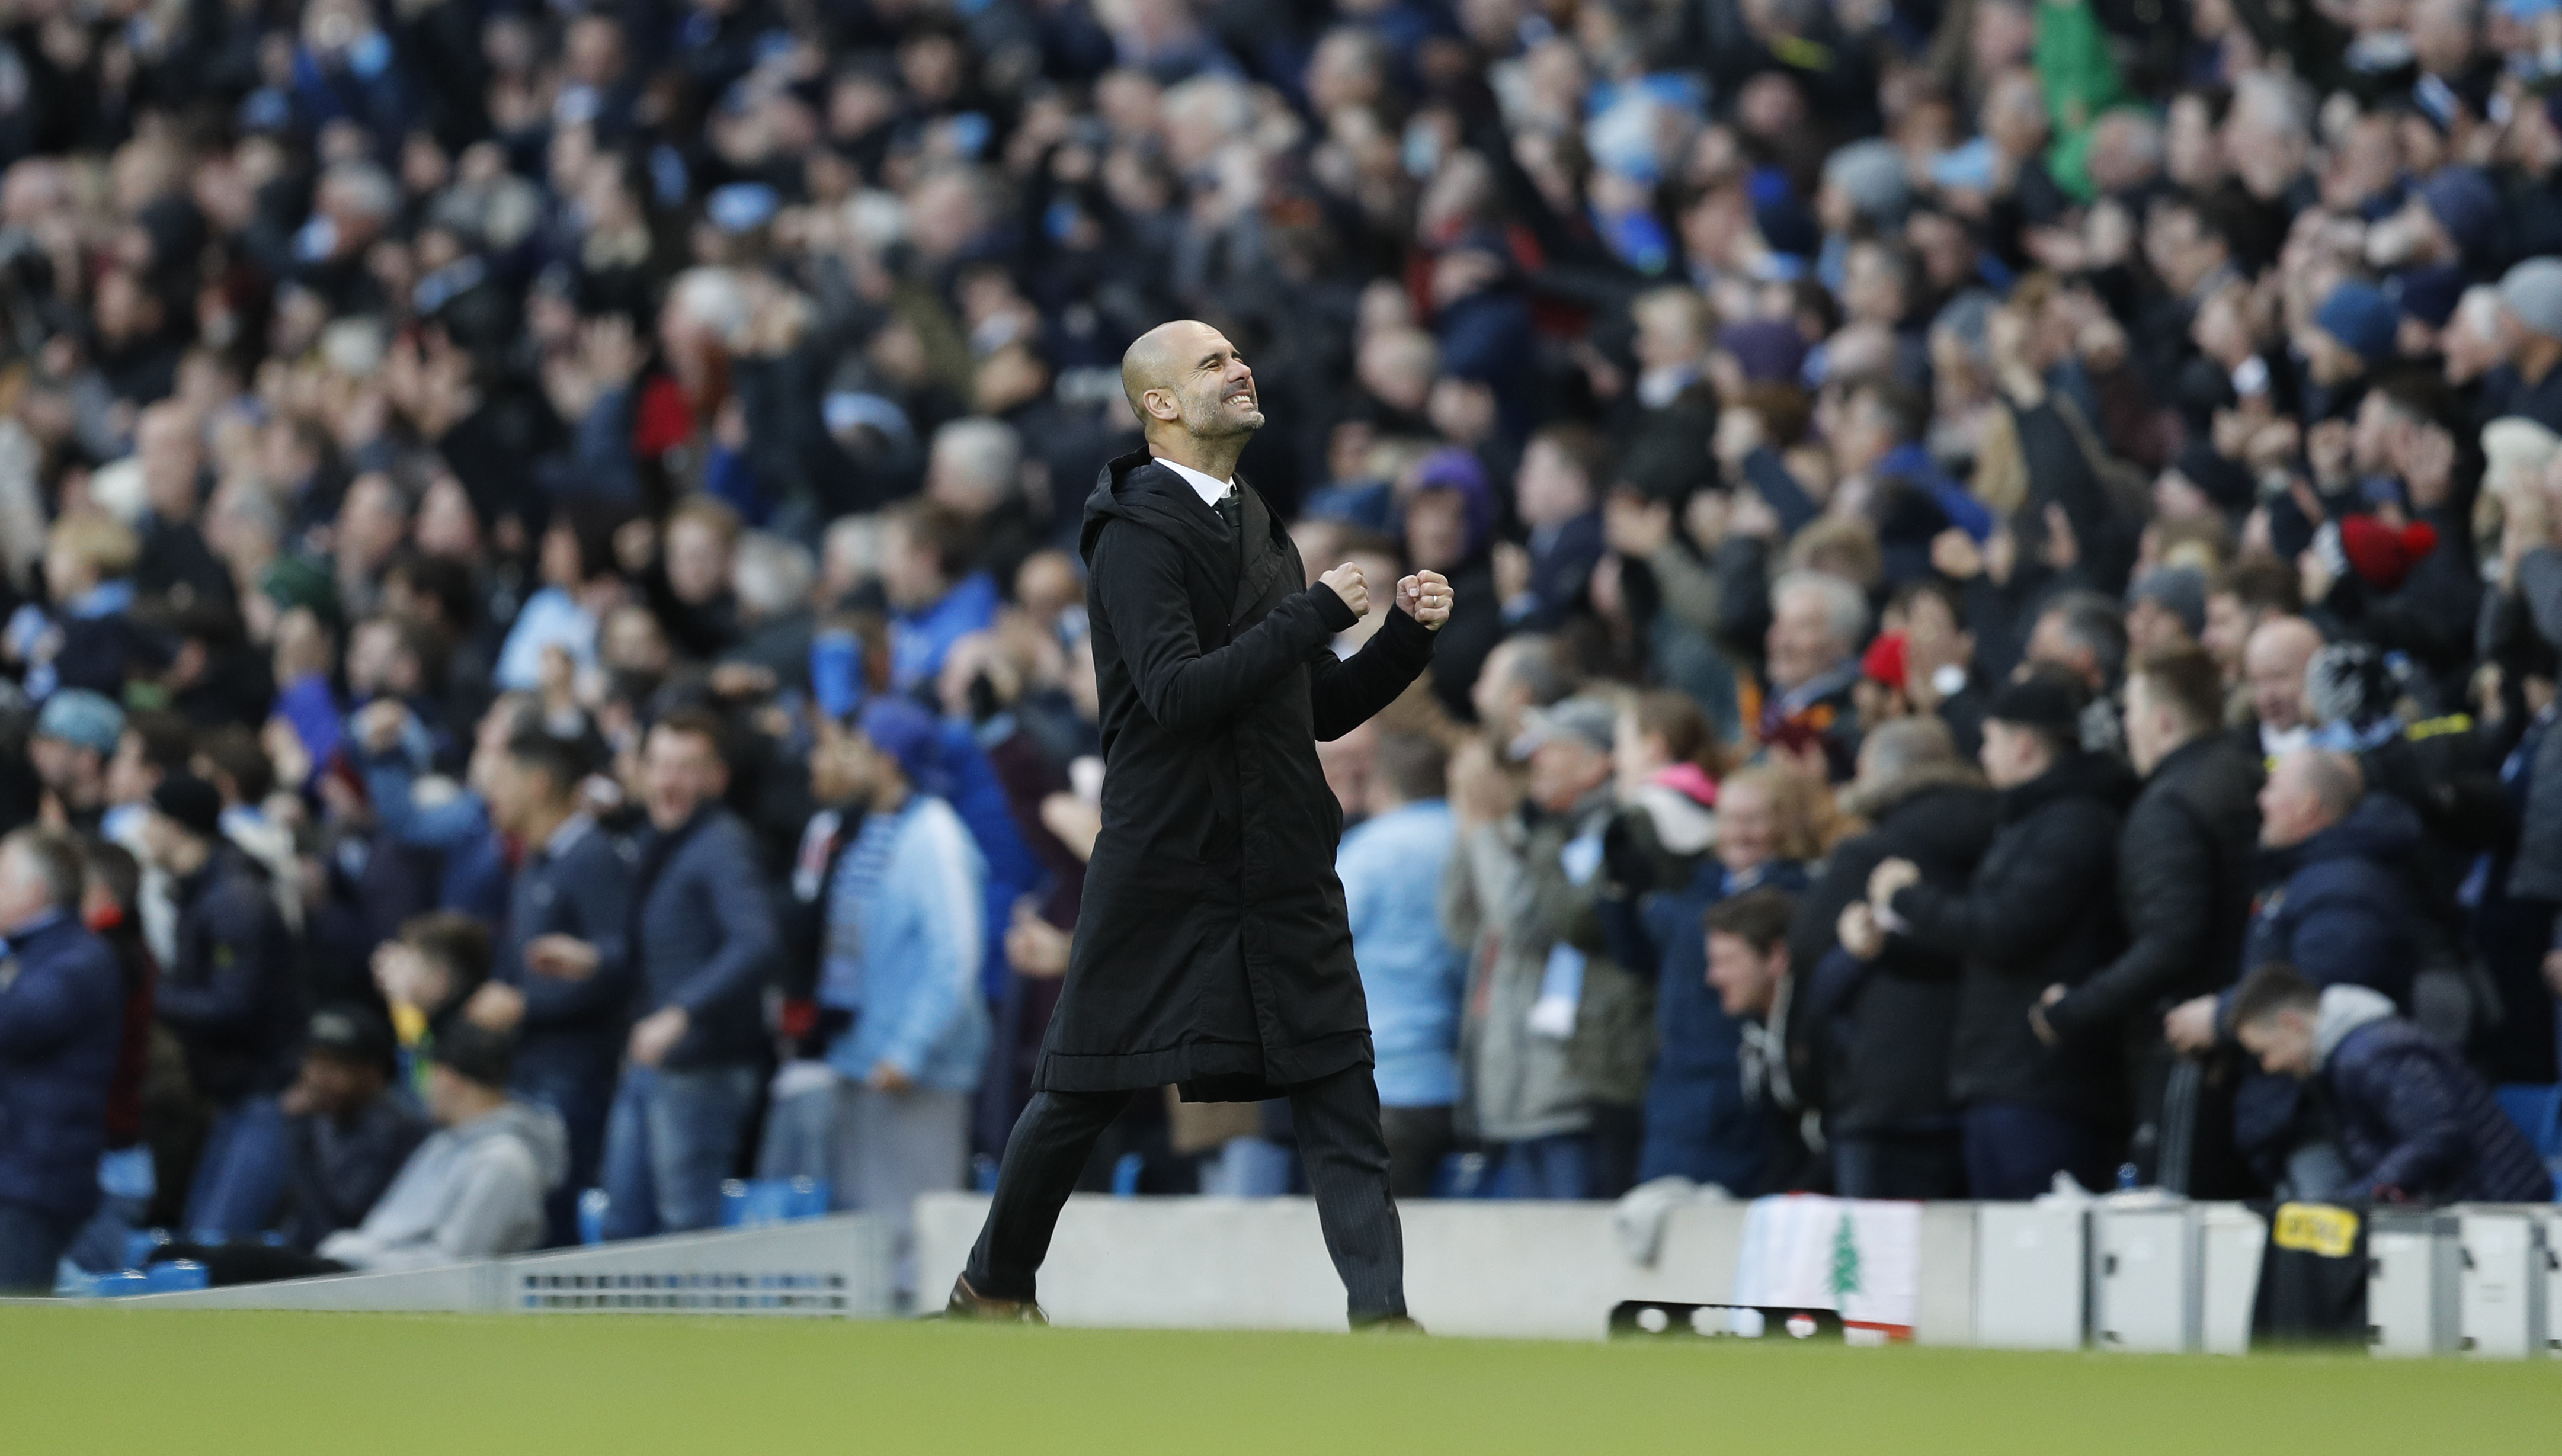 Britain Football Soccer - Manchester City v Middlesbrough - Premier League - Etihad Stadium - 5/11/16 Manchester City manager Pep Guardiola celebrates their first goal Reuters / Darren Staples Livepic EDITORIAL USE ONLY. No use with unauthorized audio, video, data, fixture lists, club/league logos or 